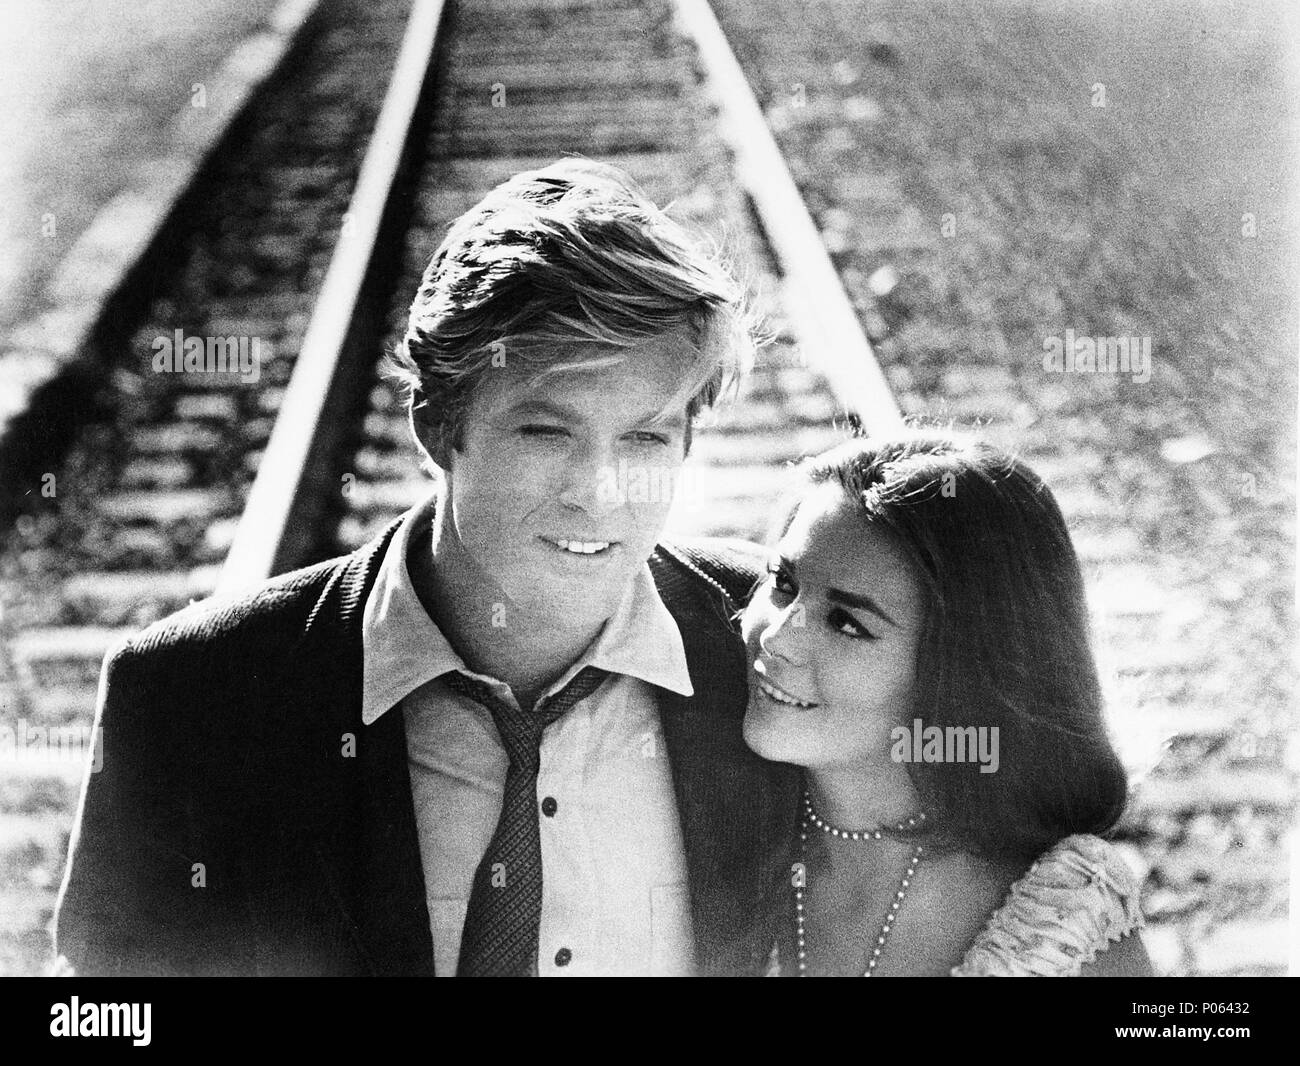 Original Film Title: THIS PROPERTY IS CONDEMNED.  English Title: THIS PROPERTY IS CONDEMNED.  Film Director: SYDNEY POLLACK.  Year: 1966.  Stars: NATALIE WOOD; ROBERT REDFORD. Credit: PARAMOUNT/SEVEN ARTS/RAY STARK / Album Stock Photo